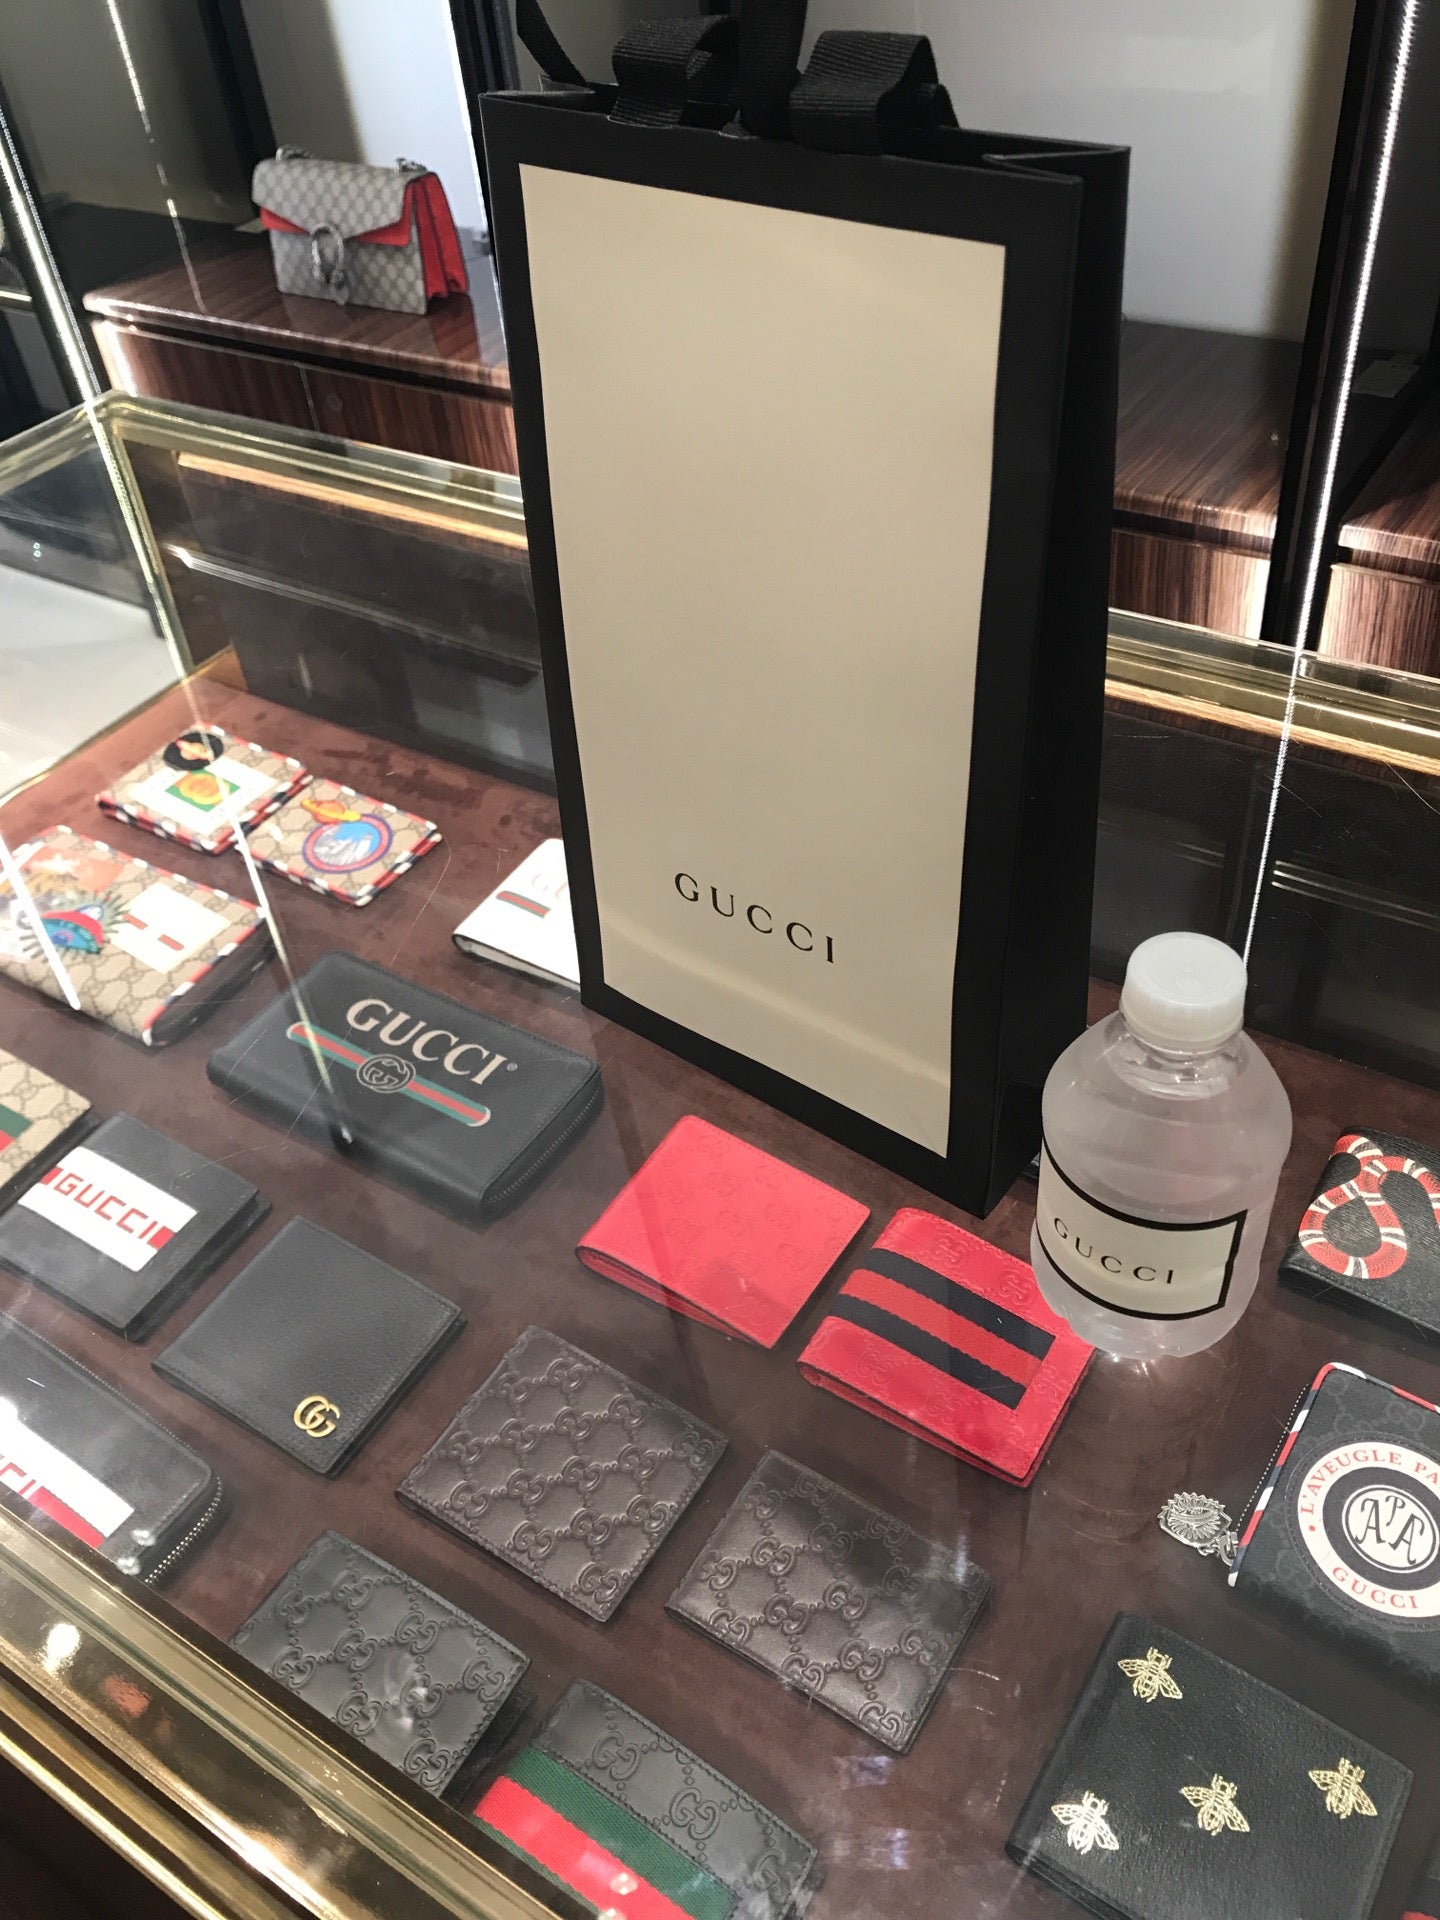 Gucci - Bloomingdales Tysons Galleria, 8100 Tysons Corner Center